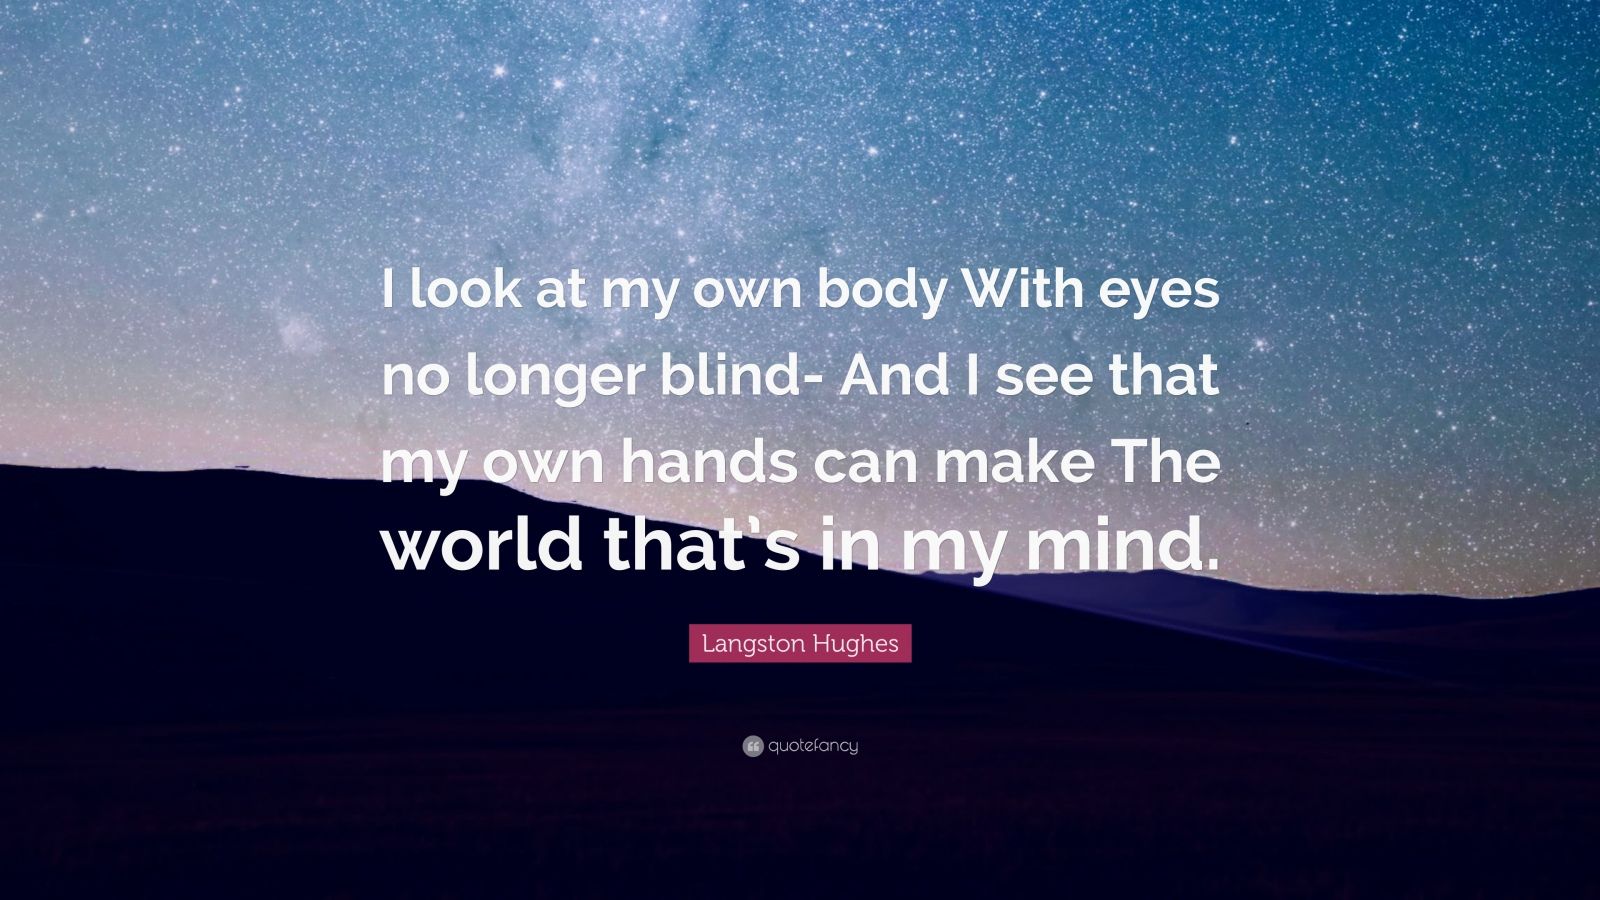 Langston Hughes Quote: "I look at my own body With eyes no longer blind- And I see that my own ...